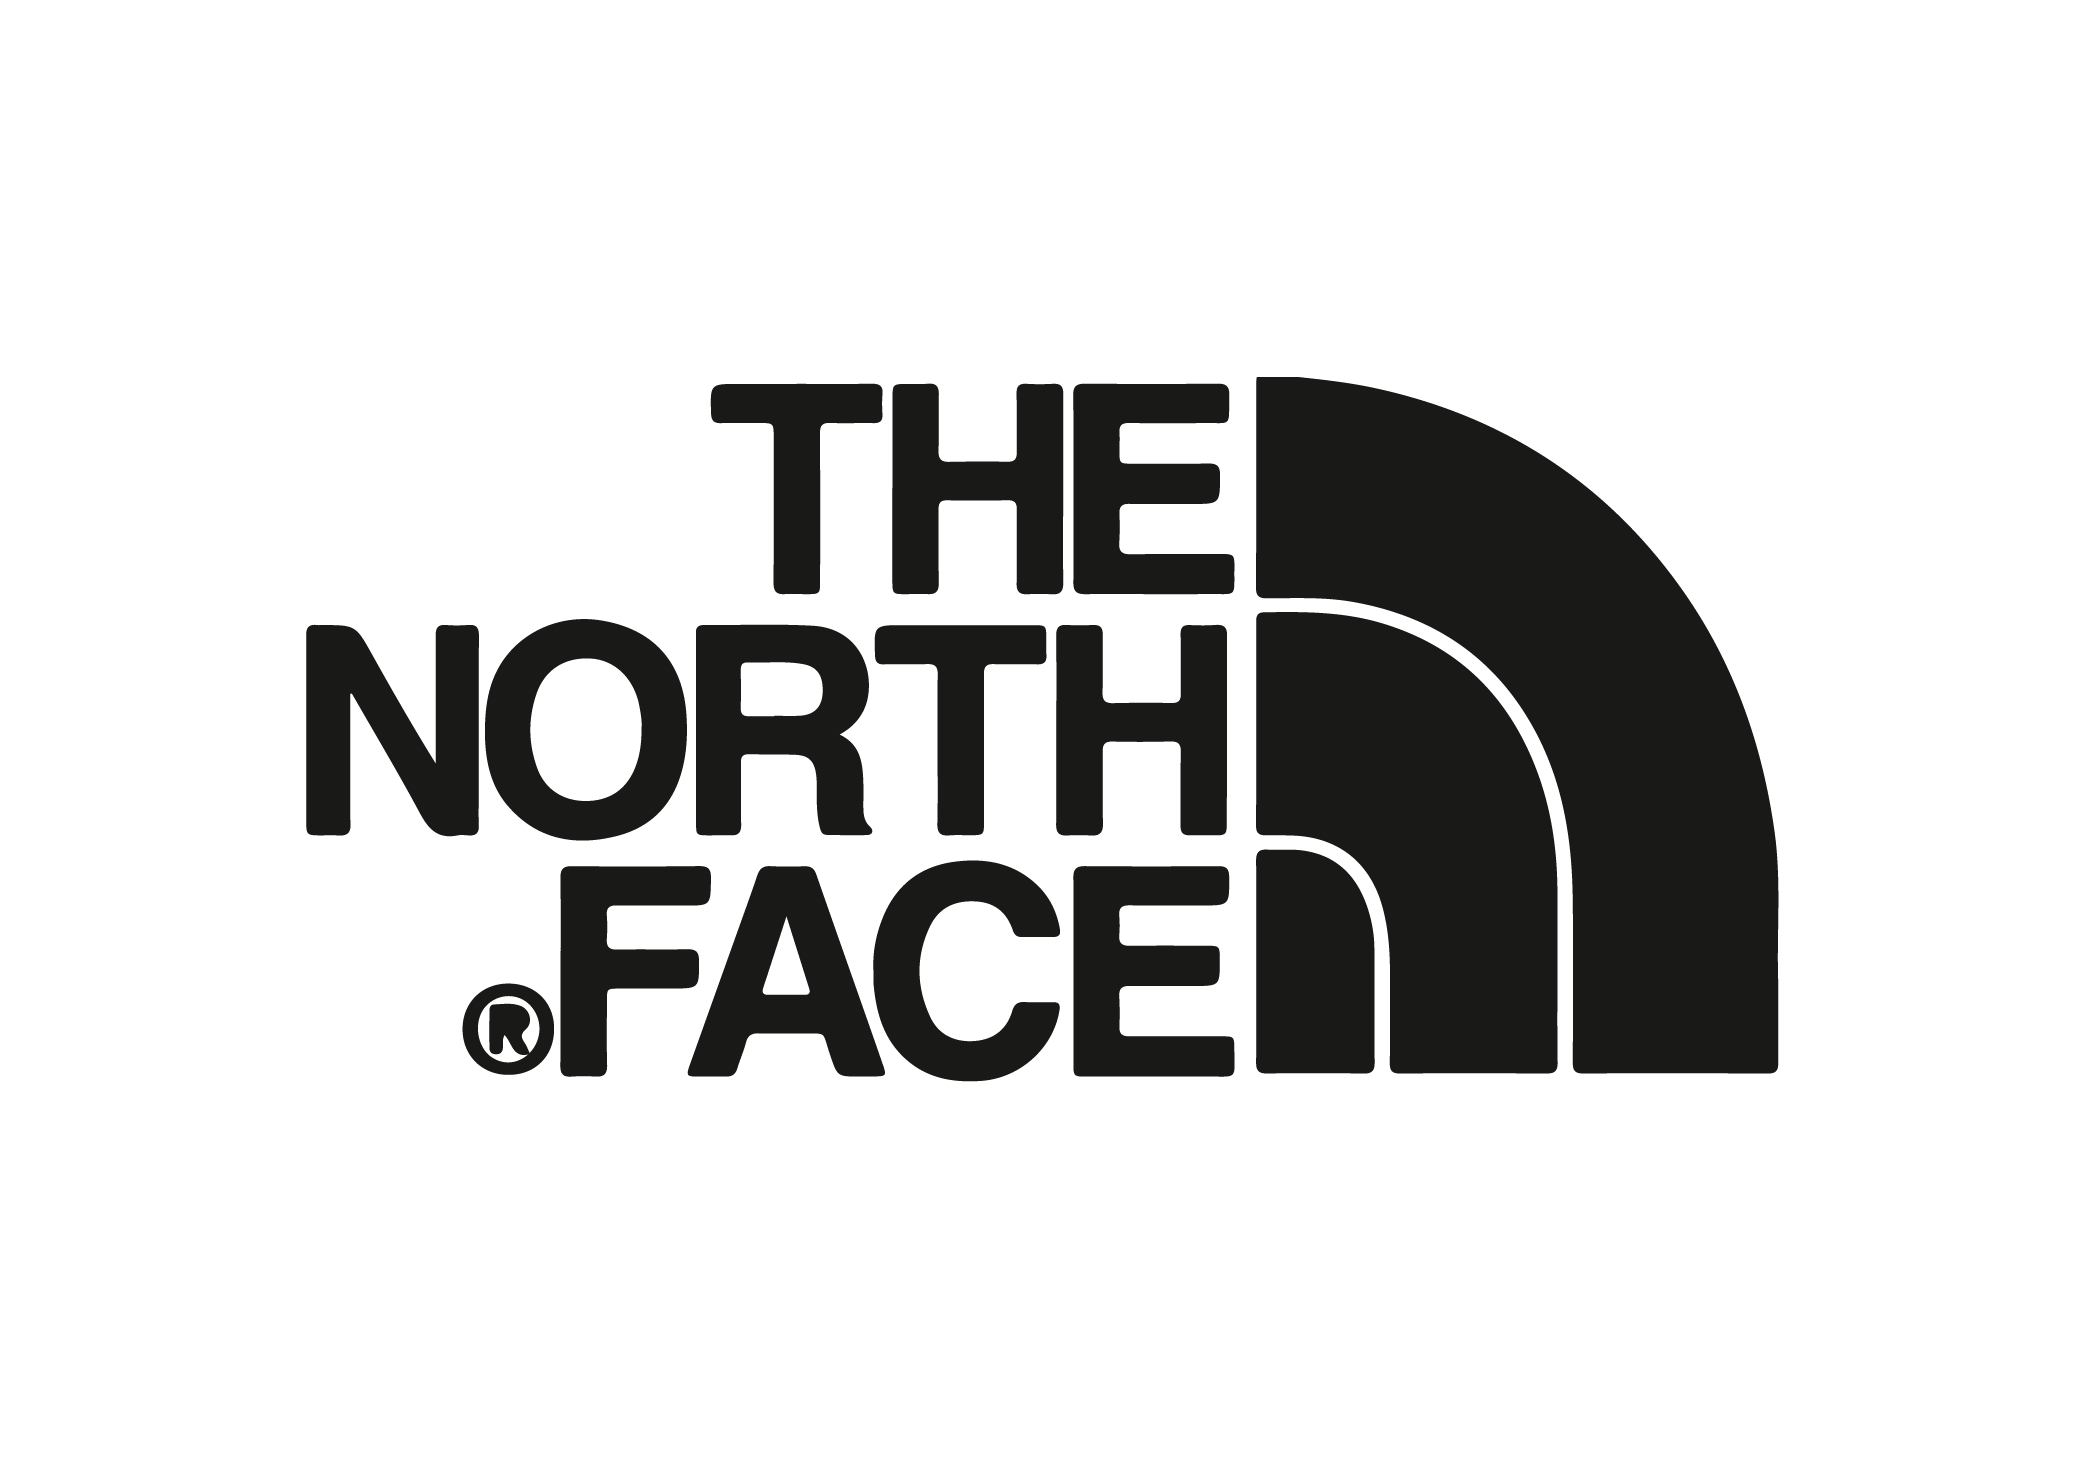 logo The North Face